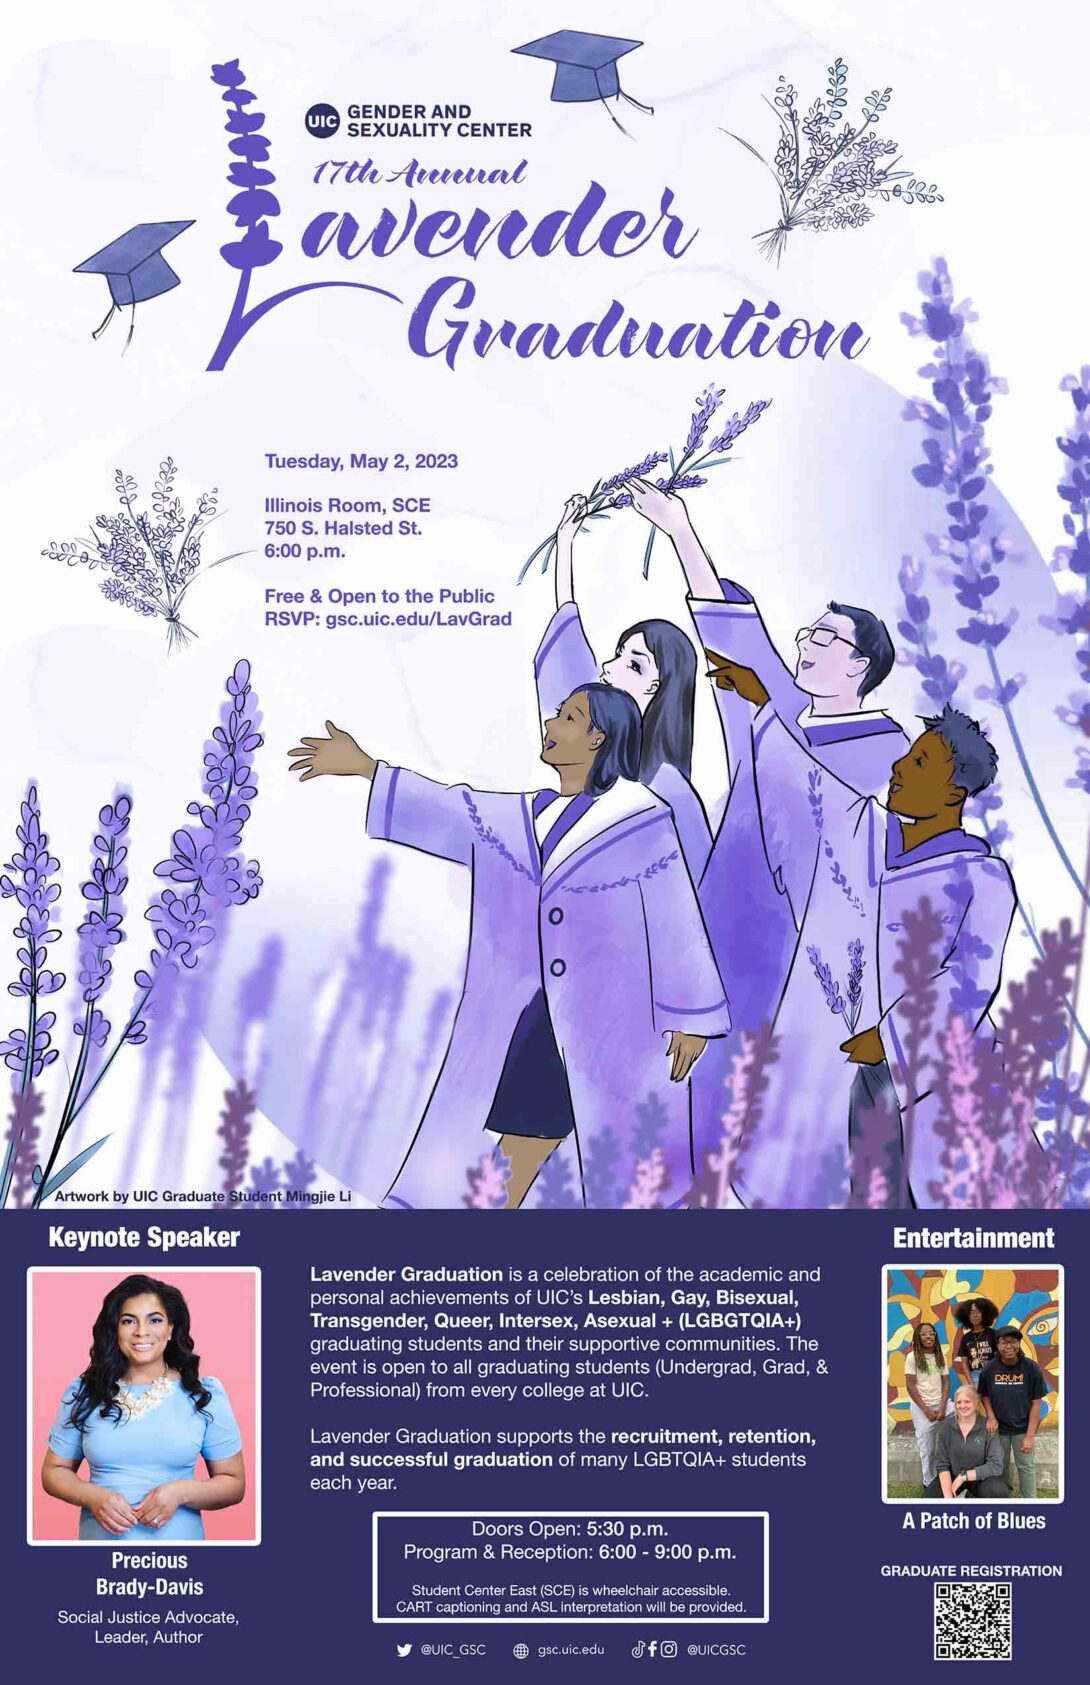 ID: A white background with lavender plants throughout features four graduates at the bottom right of the page. The GSC logo is at the top and below, the lavender text states 